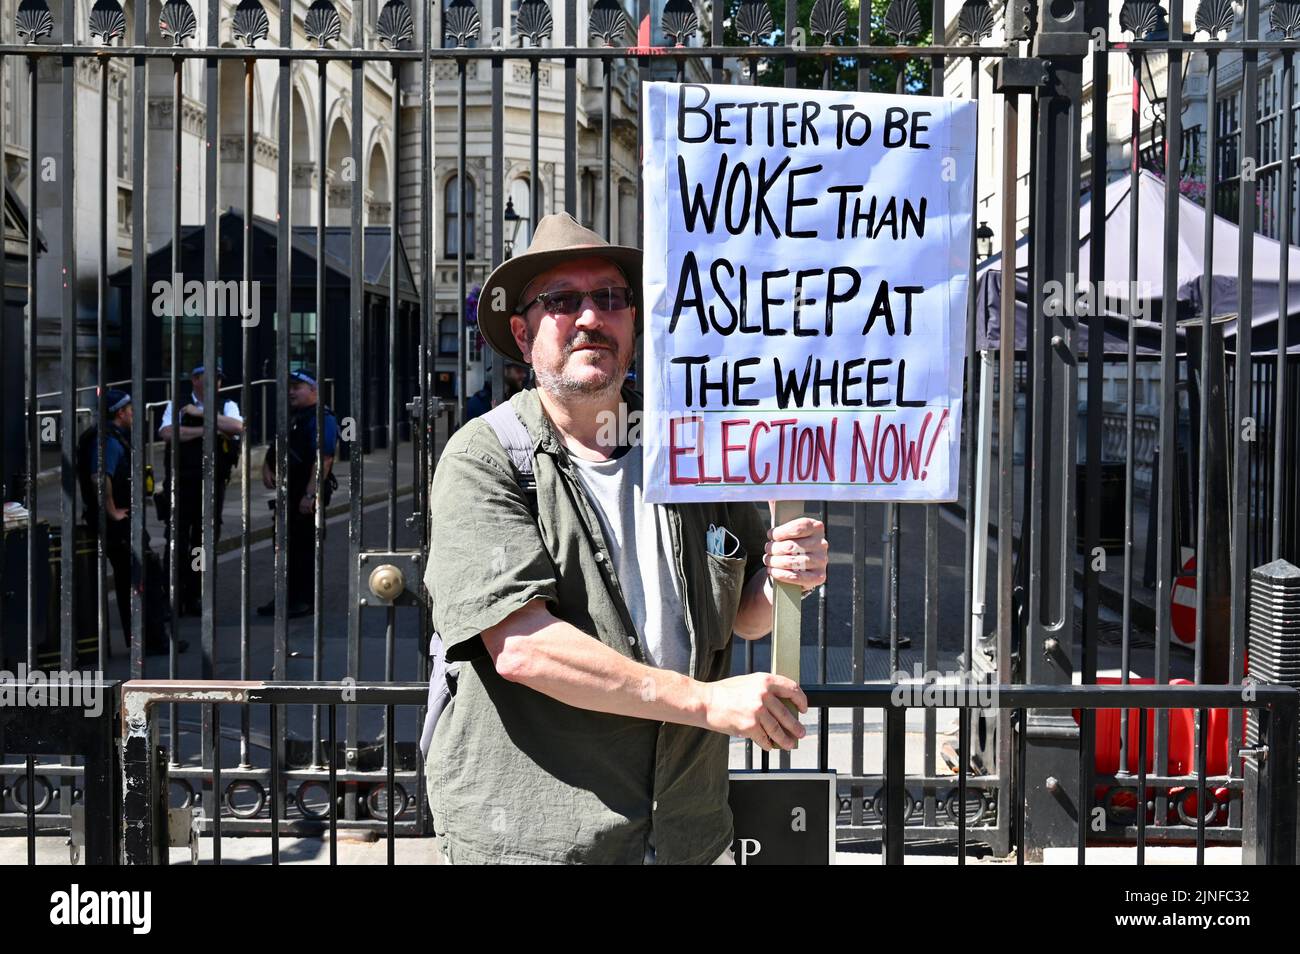 London, UK. A lone protester braved the heat to call out the Government who appear to be asleep at the wheel during this challenging time. Downing Street Gates, Whitehall. Credit: michael melia/Alamy Live News Stock Photo